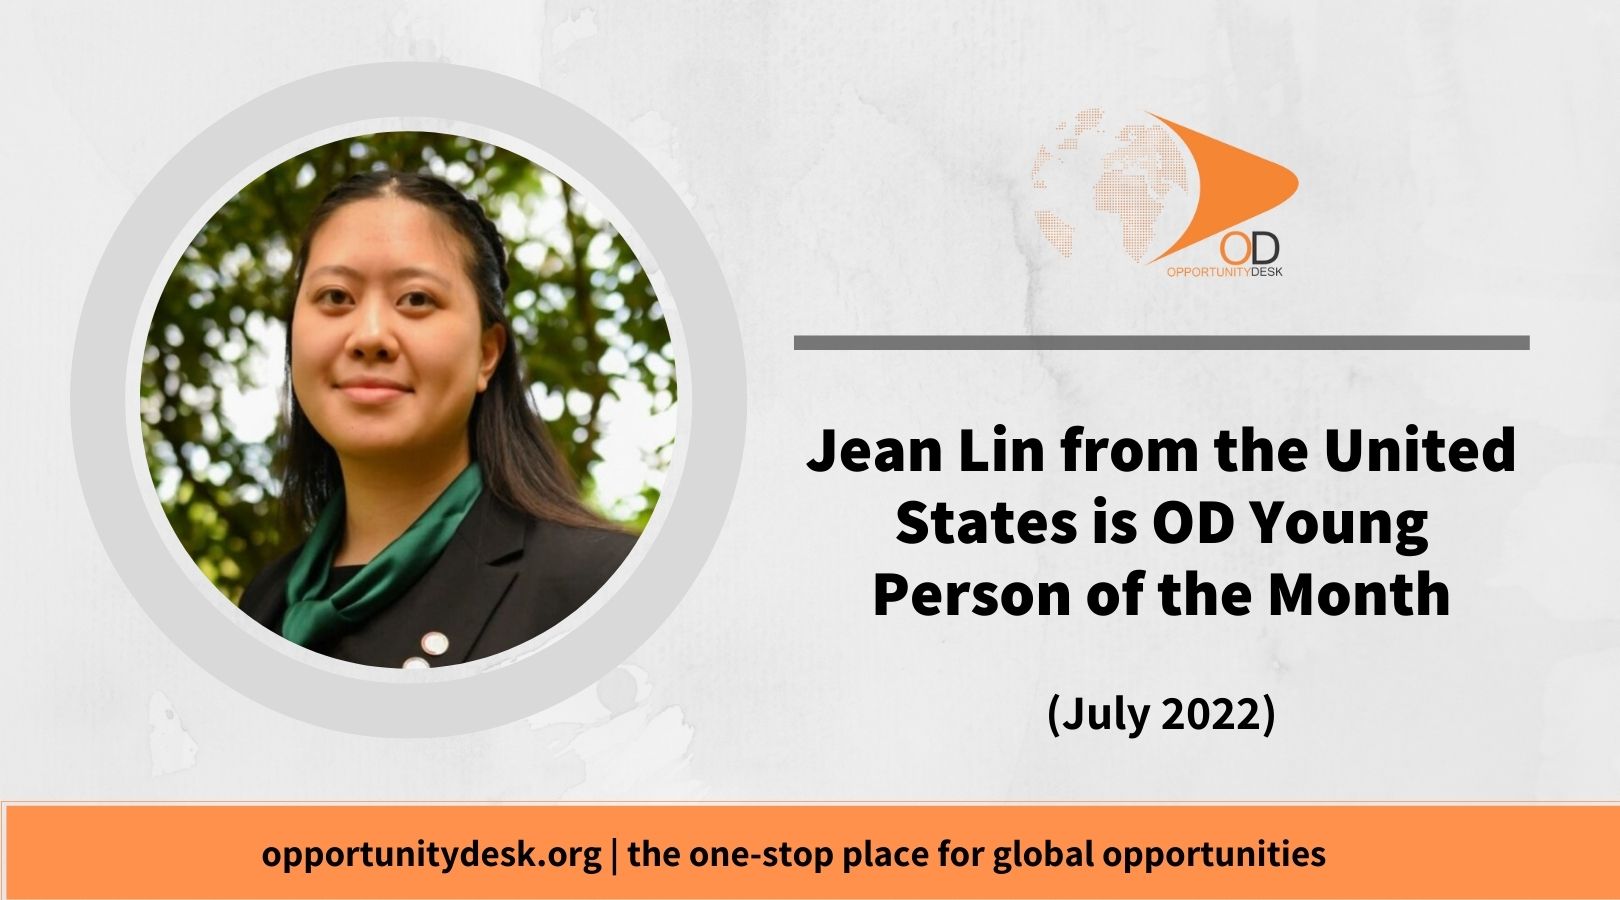 Jean Lin from the United States is OD Young Person of the Month for July 2022